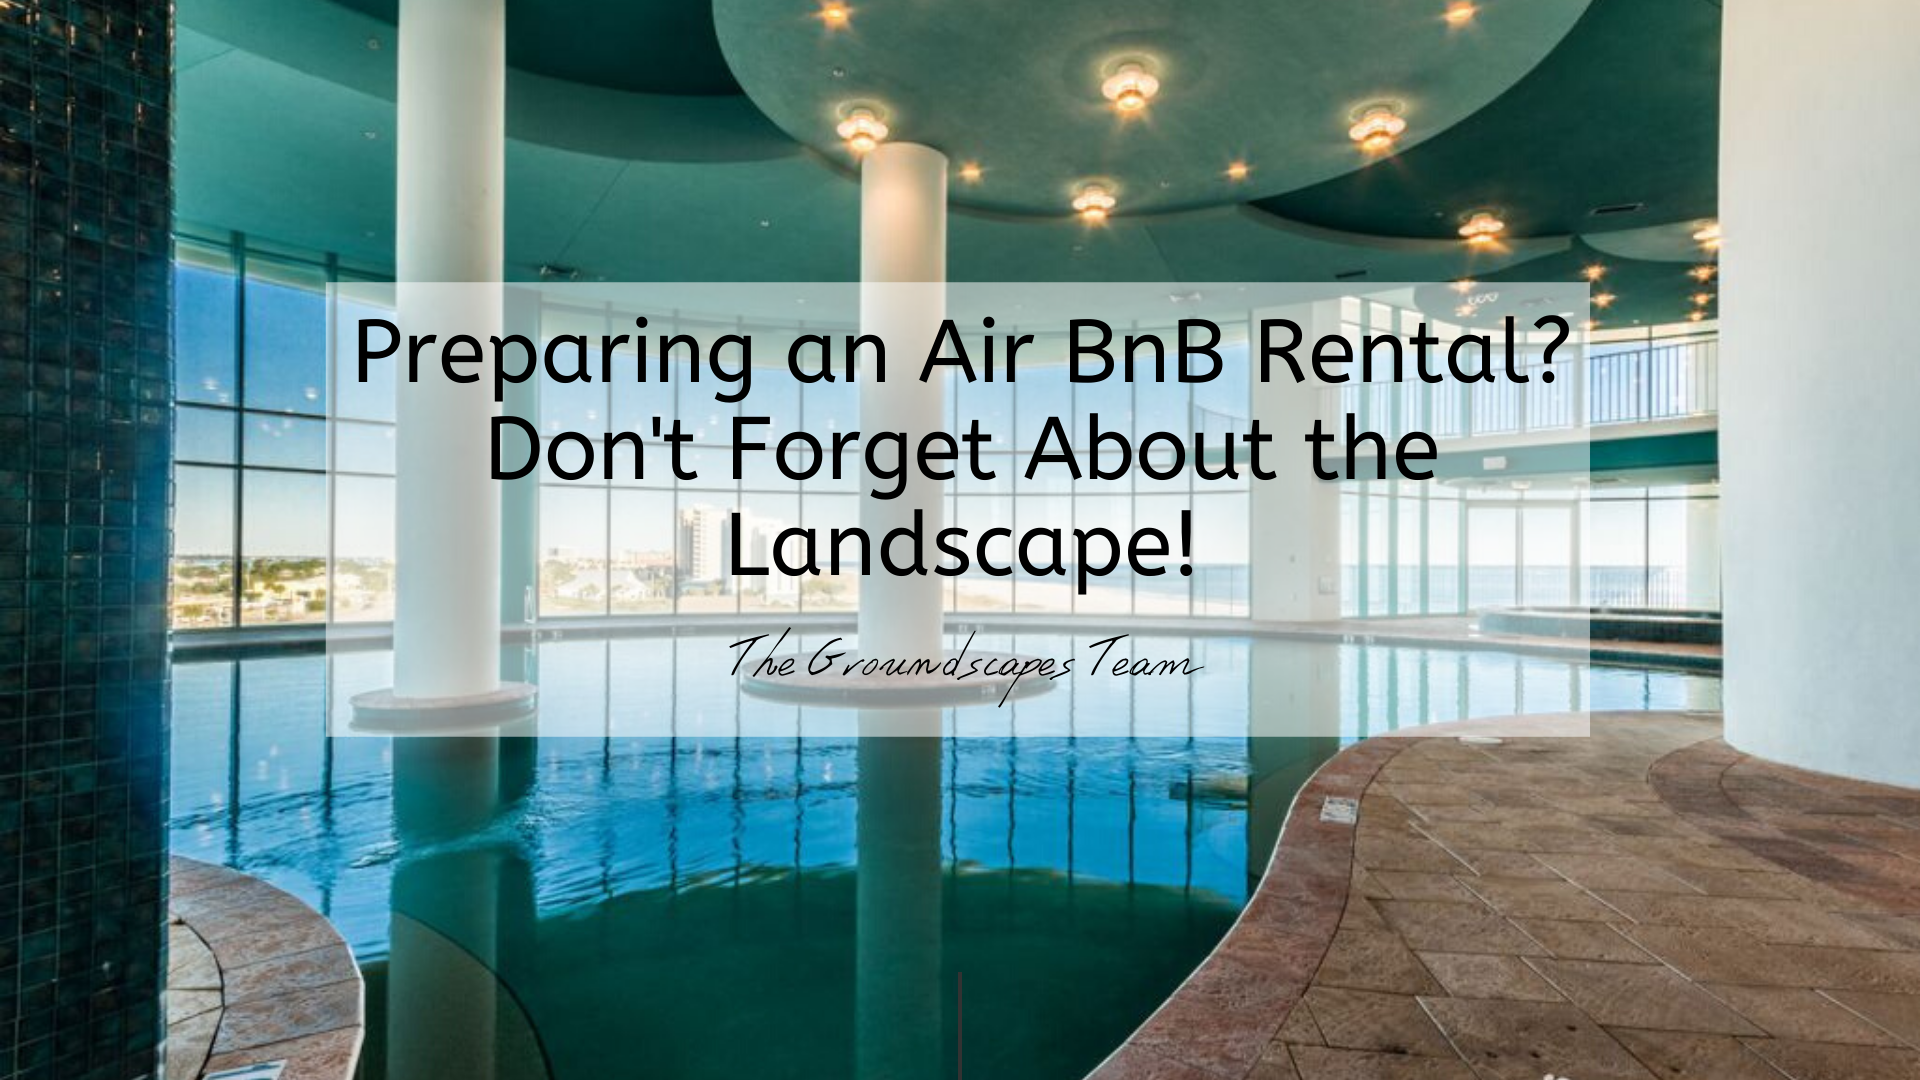 Preparing an Air BnB Rental? Don't Forget About the Landscape!